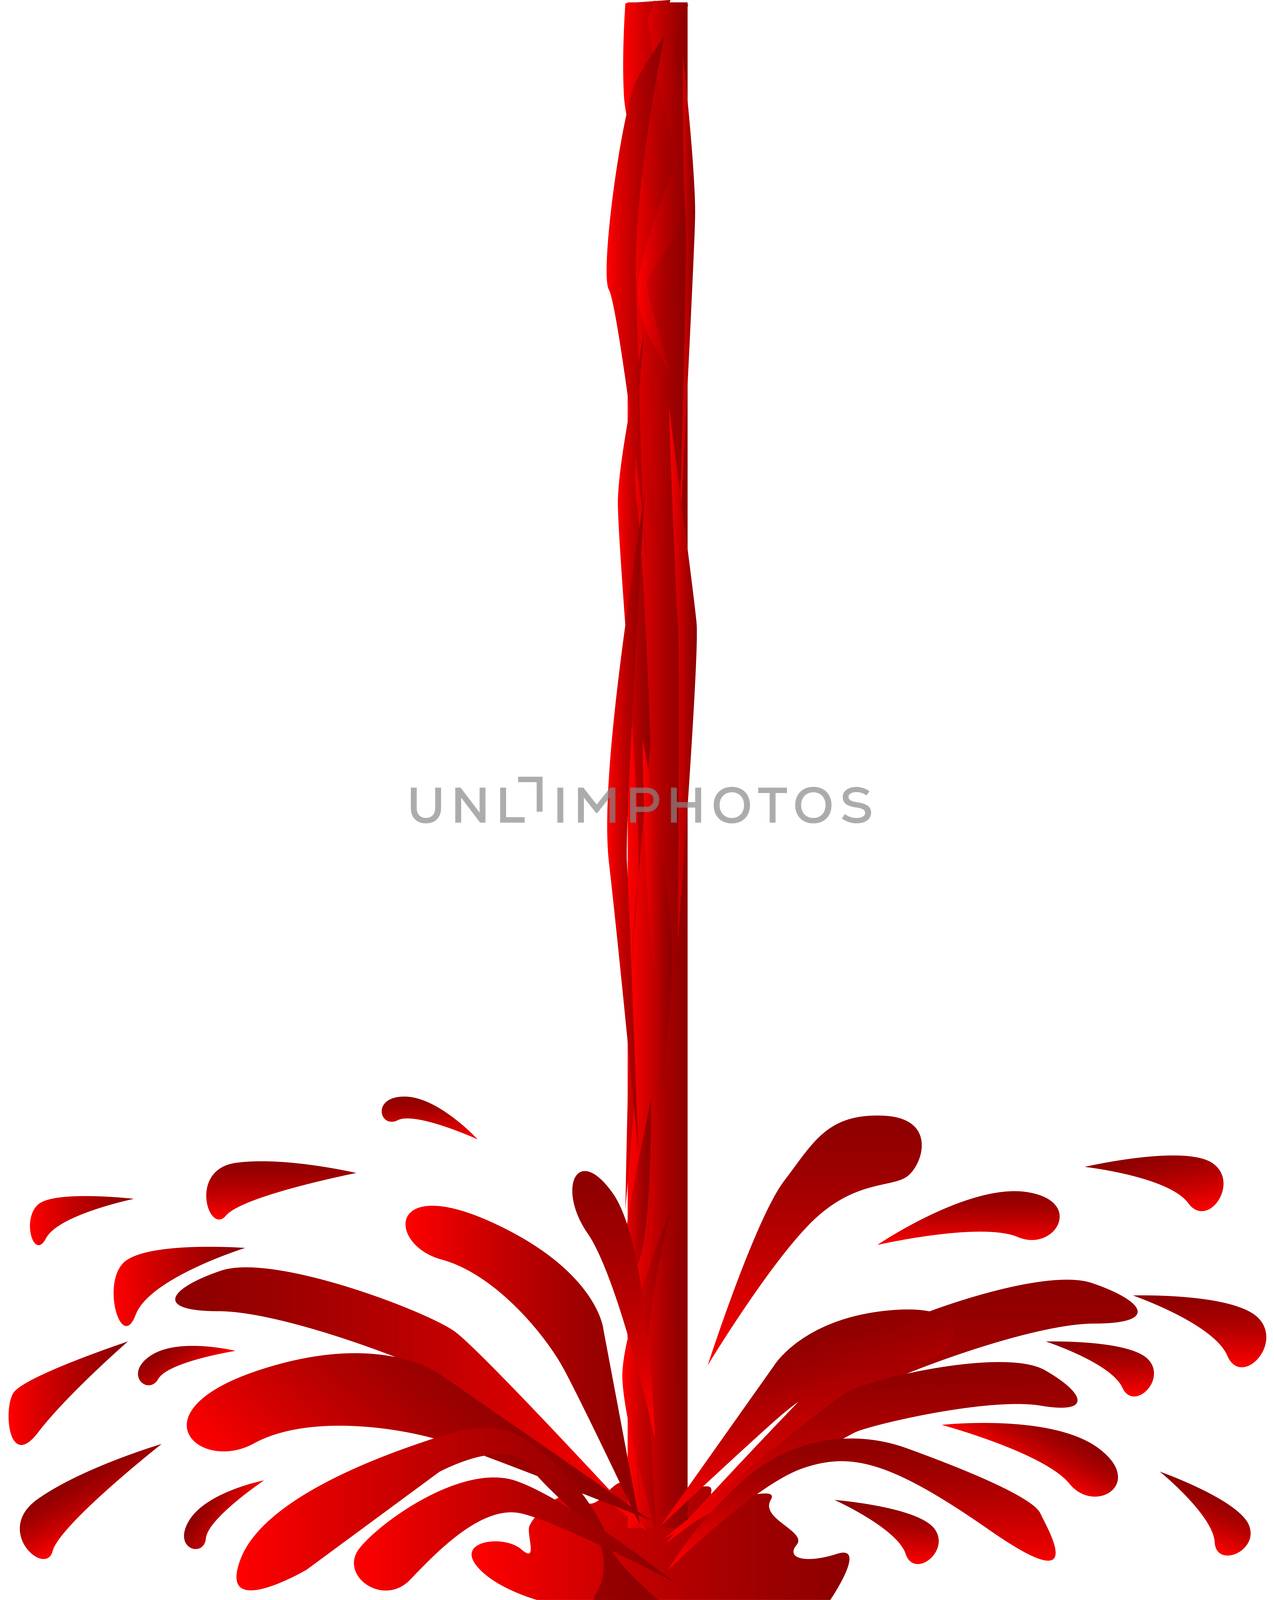 Red wine being pored over a white background